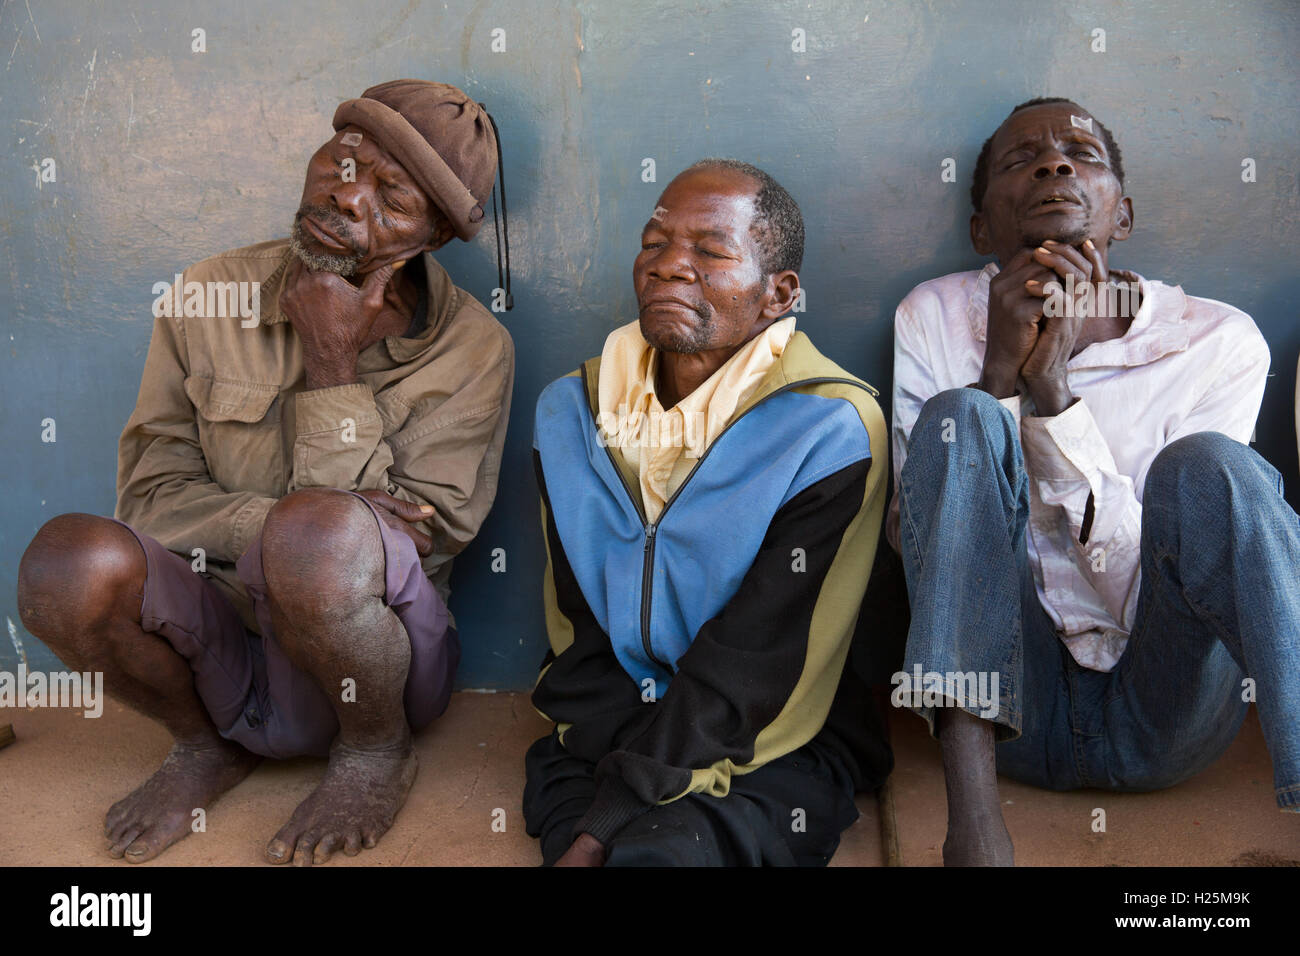 Ribue Hospital, Nampula Province, Mozambique, August 2015: Left to right, Pacuneta Peteia, a blacksmith from Mecuburi, Vasco Larawiaca and Apostino Almeita, 49, all from Mecuburi, awaiting their cataract operations. Photo by Mike Goldwater Stock Photo